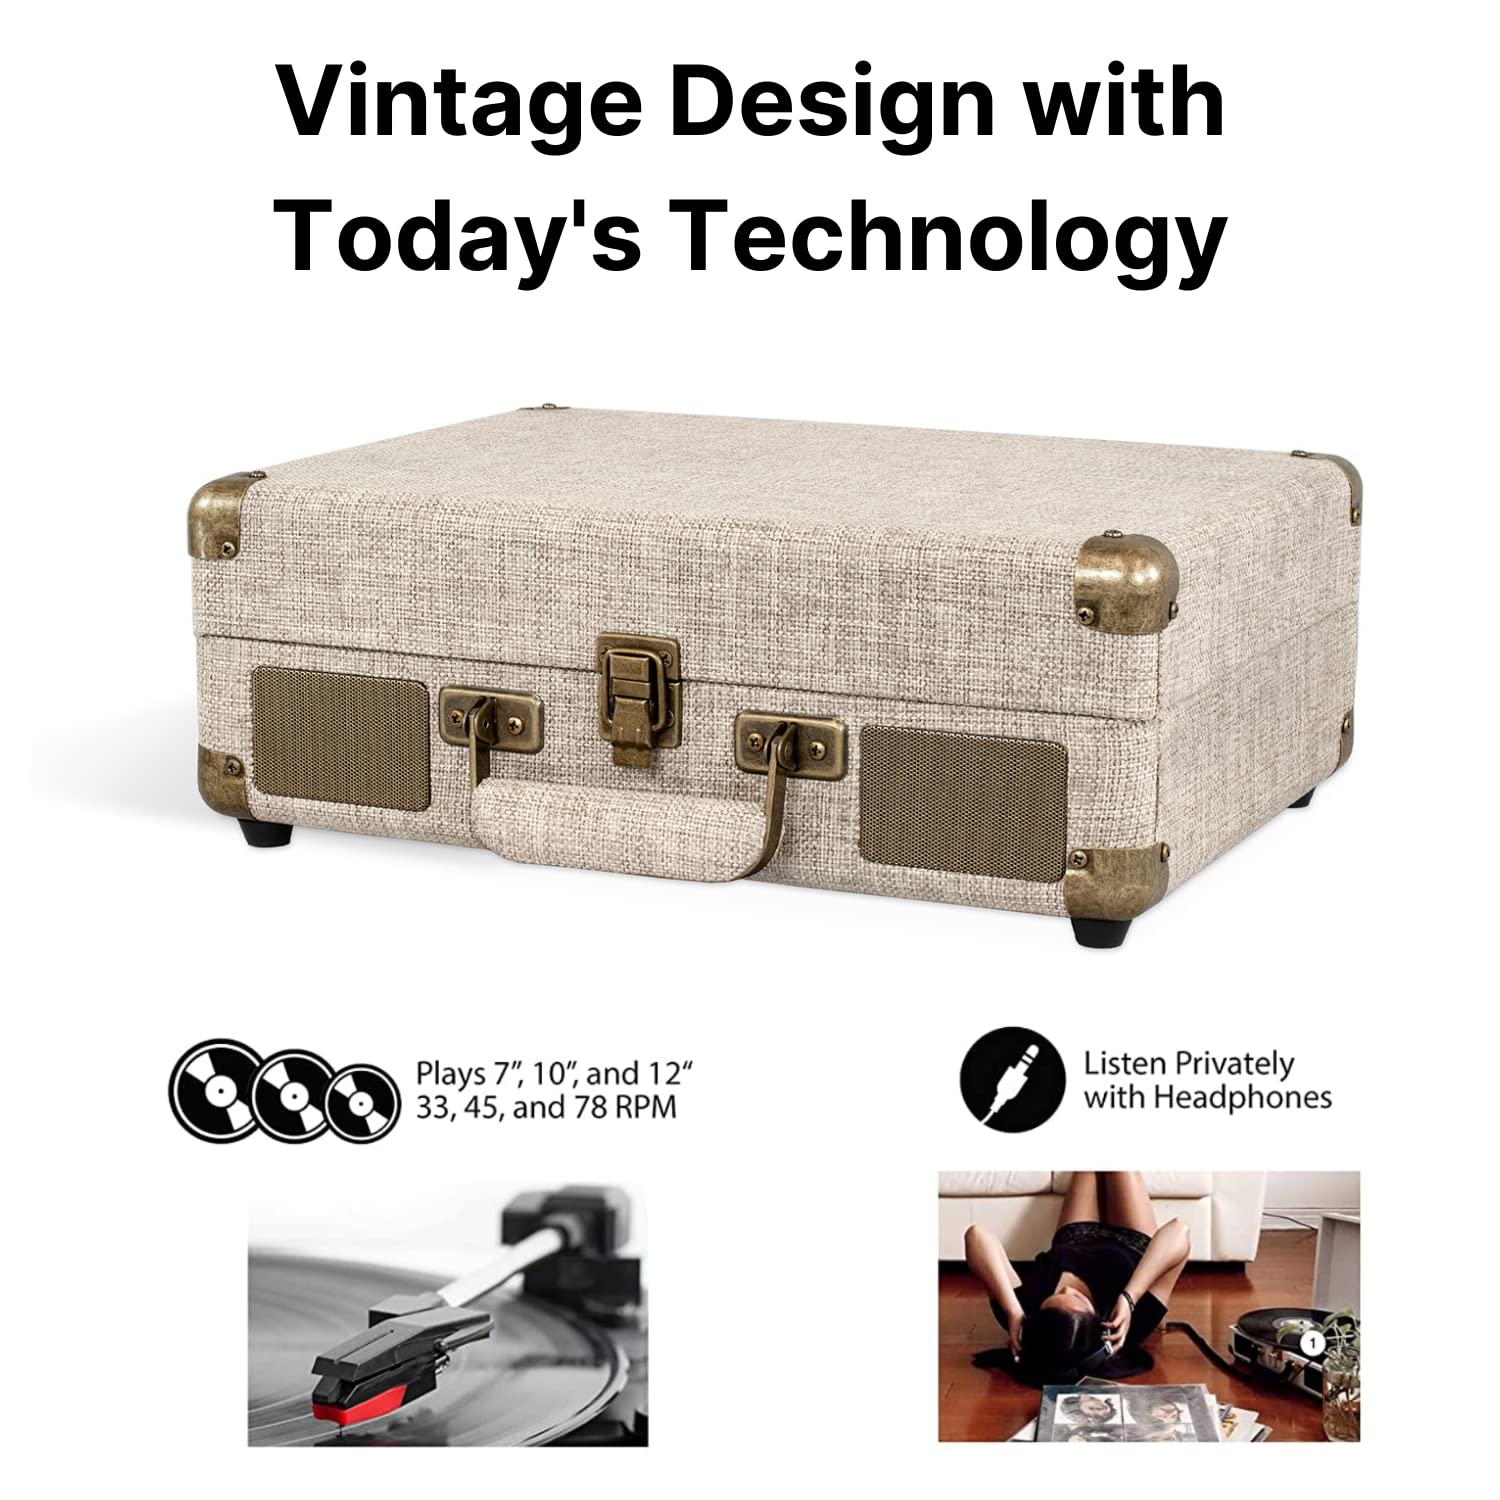 Victrola Journey+ Signature Turntable Record Player - 33-1/3, 45 & 78 RPM Suitcase Vinyl Record Player, Bluetooth Connectivity & Built-in Speakers, Stereo RCA Output, Linen Finish, Cream